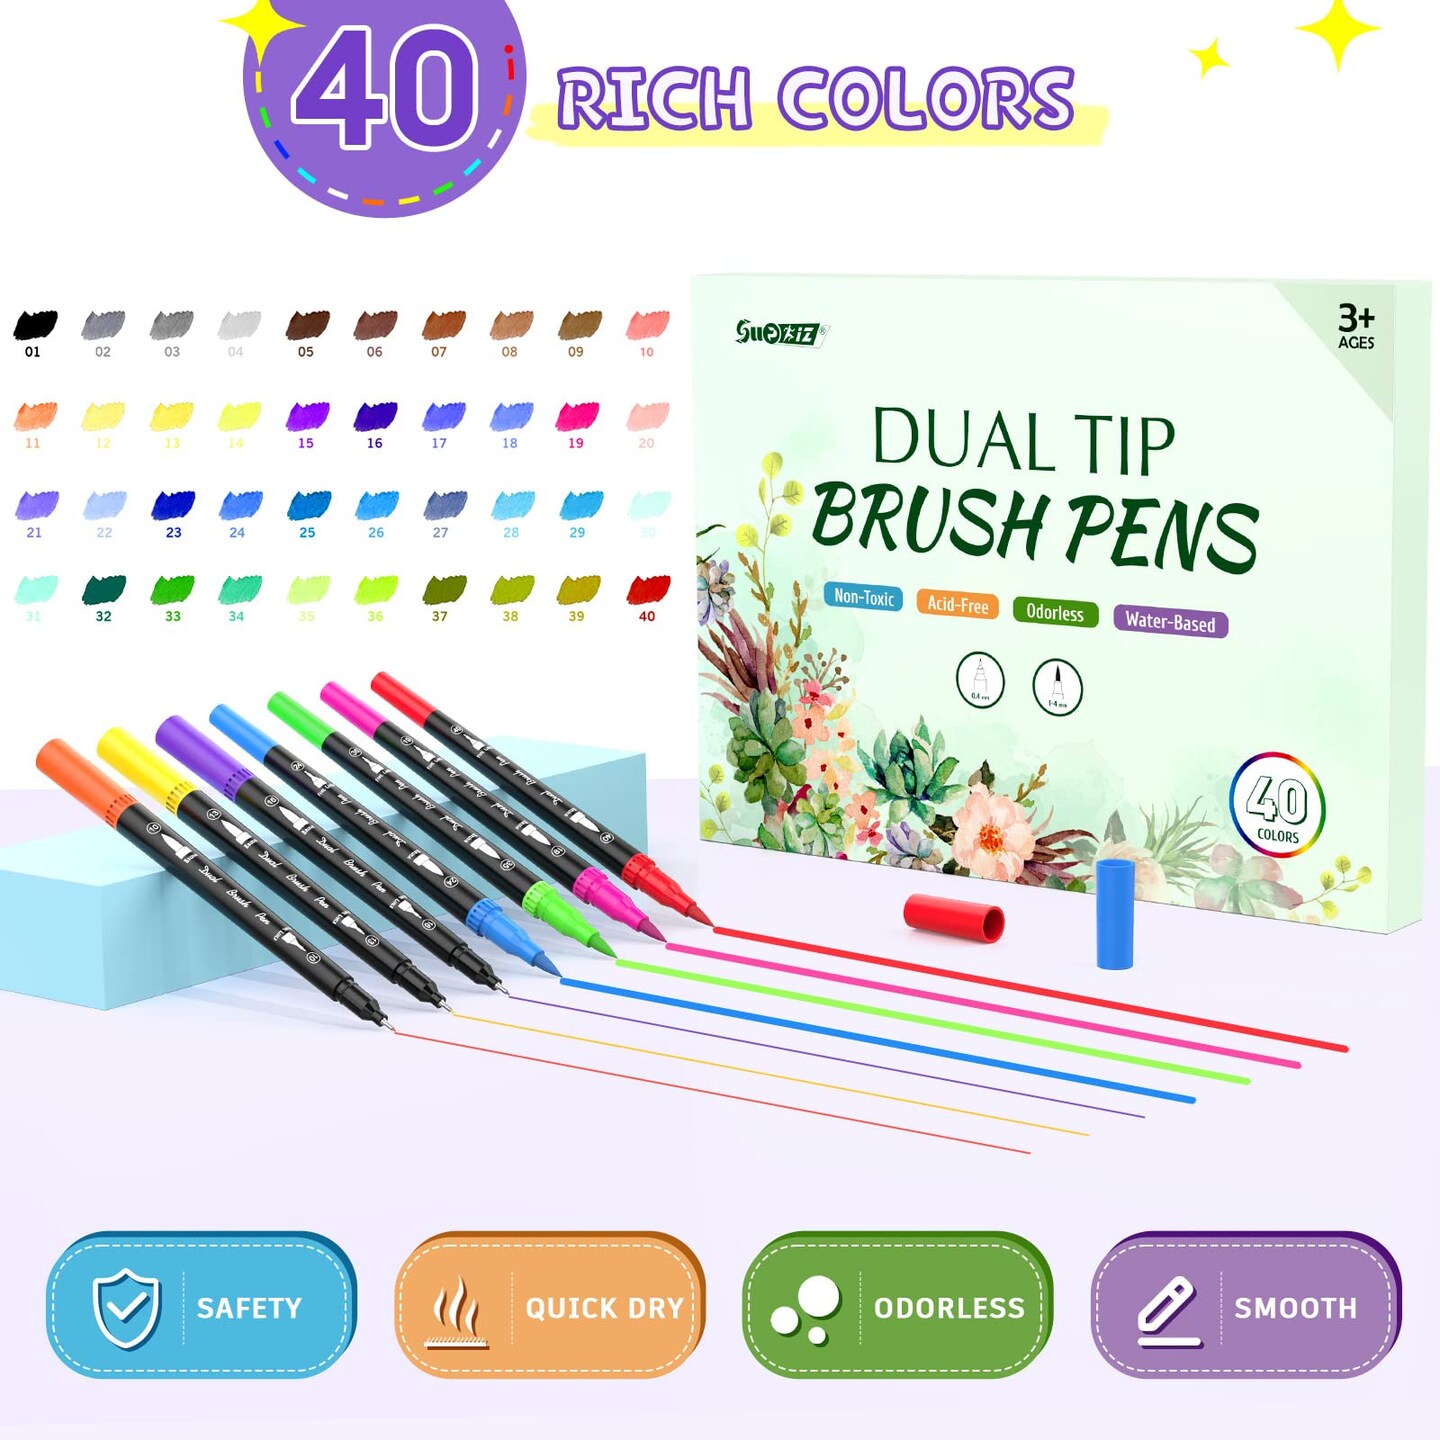 Dual Tip Coloring Markers, 40 Color Brush Pens Set, Kids Adults Artist Fine Point Marker Pens, Watercolor Pens for Lettering, Drawing, Journaling, Note taking, Writing